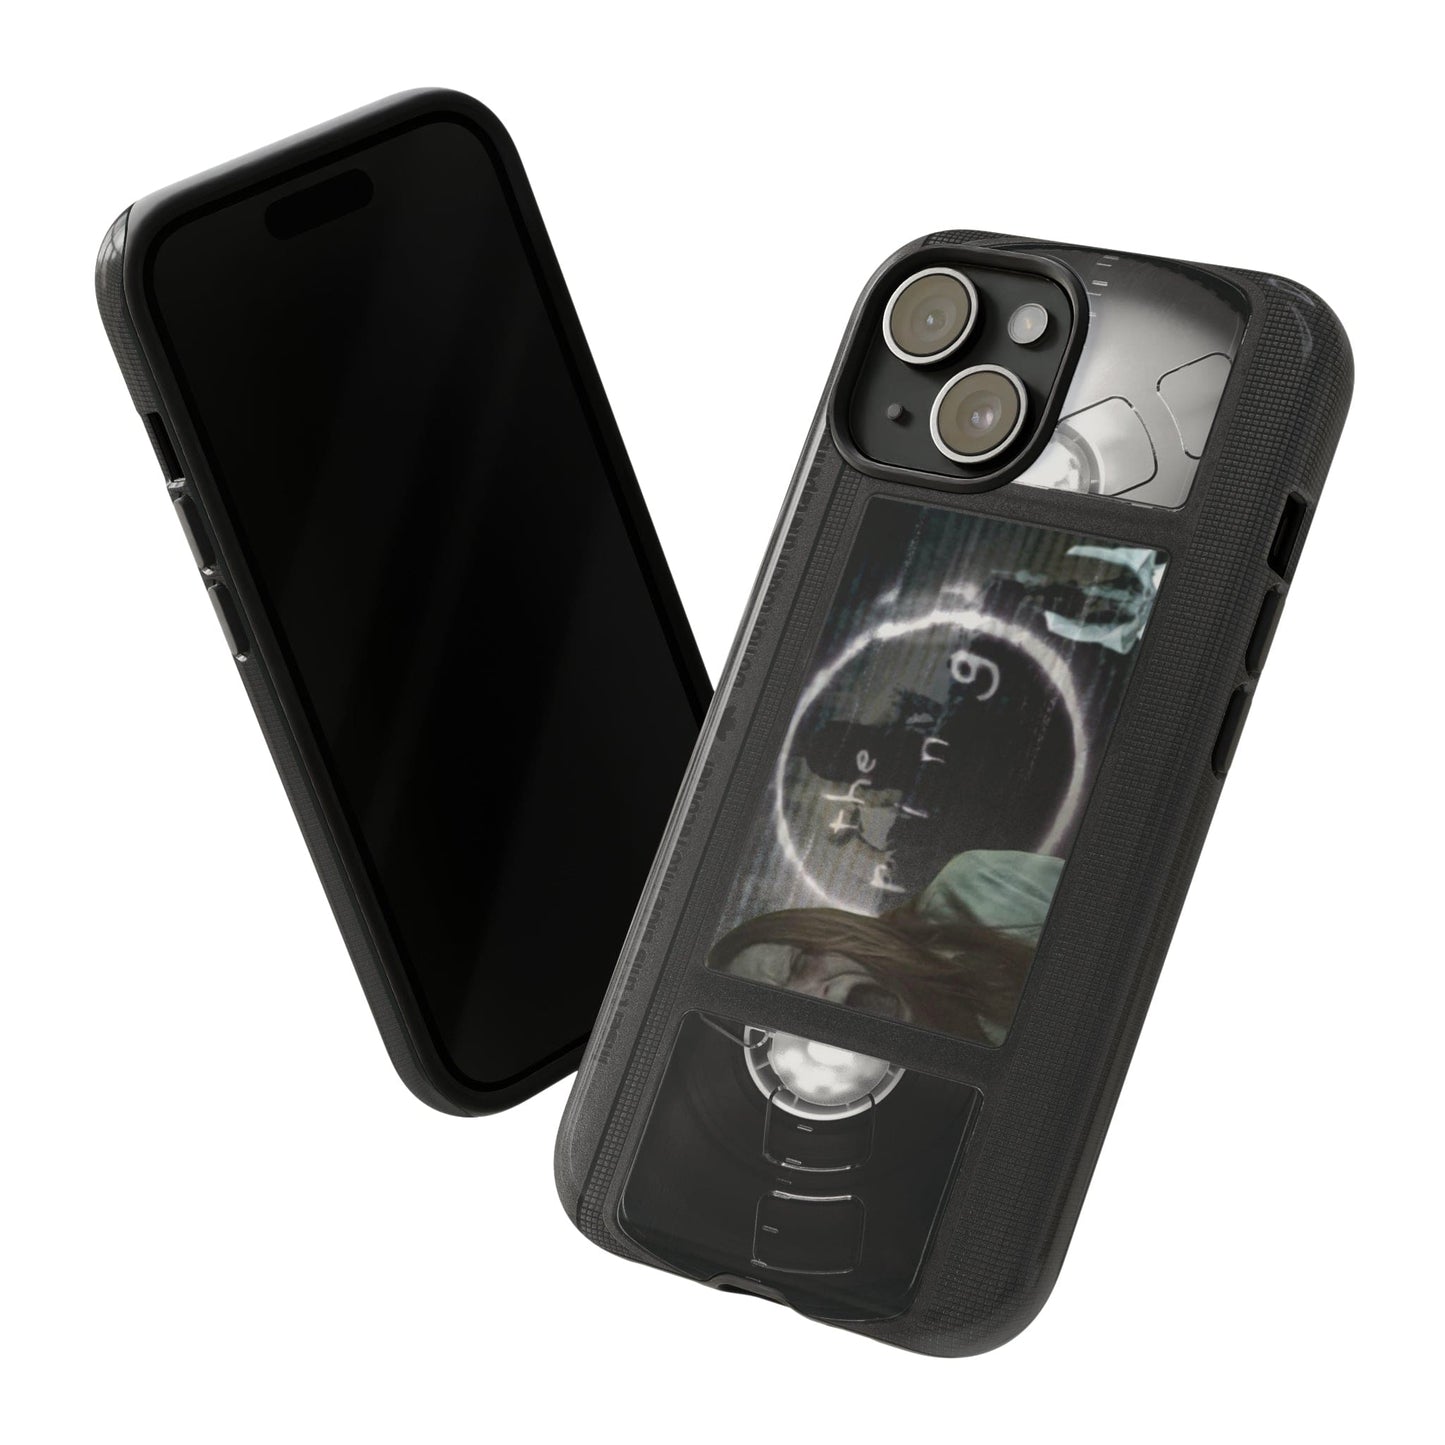 Ring Impact Resistant VHS Phone Case